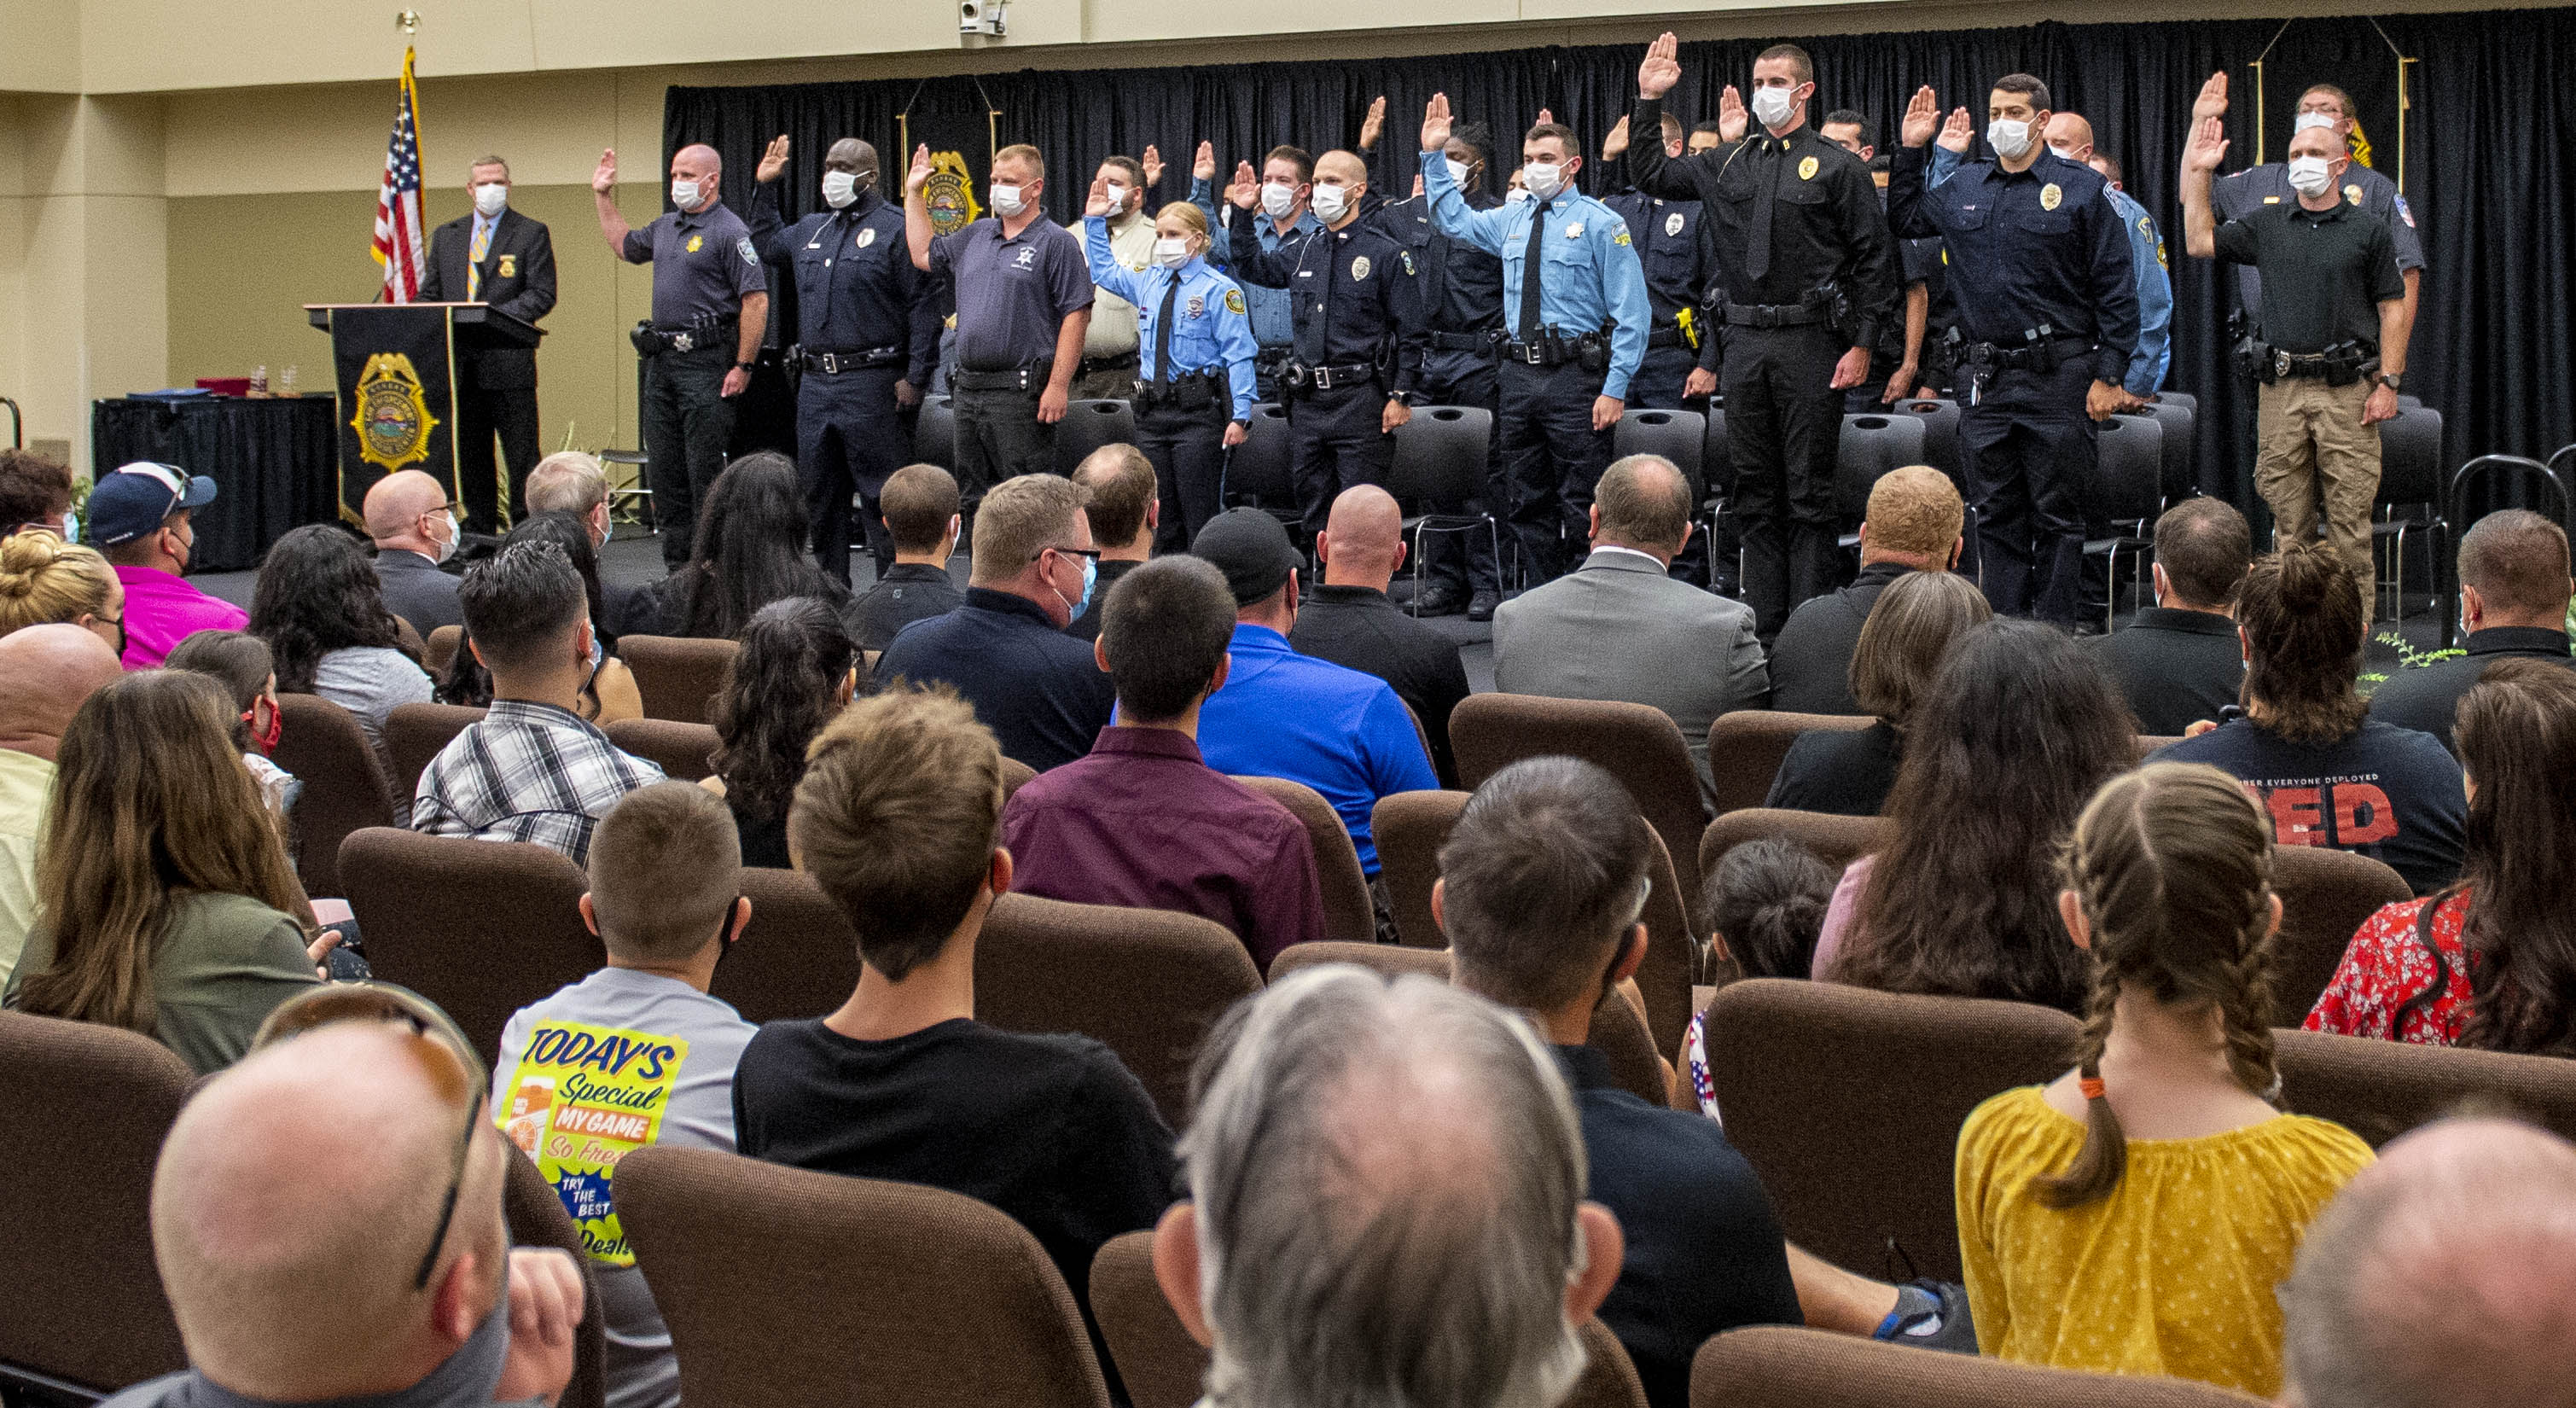 The 282nd Basic Training Class recites the Law Enforcement Oath of Office in front of the attending audience